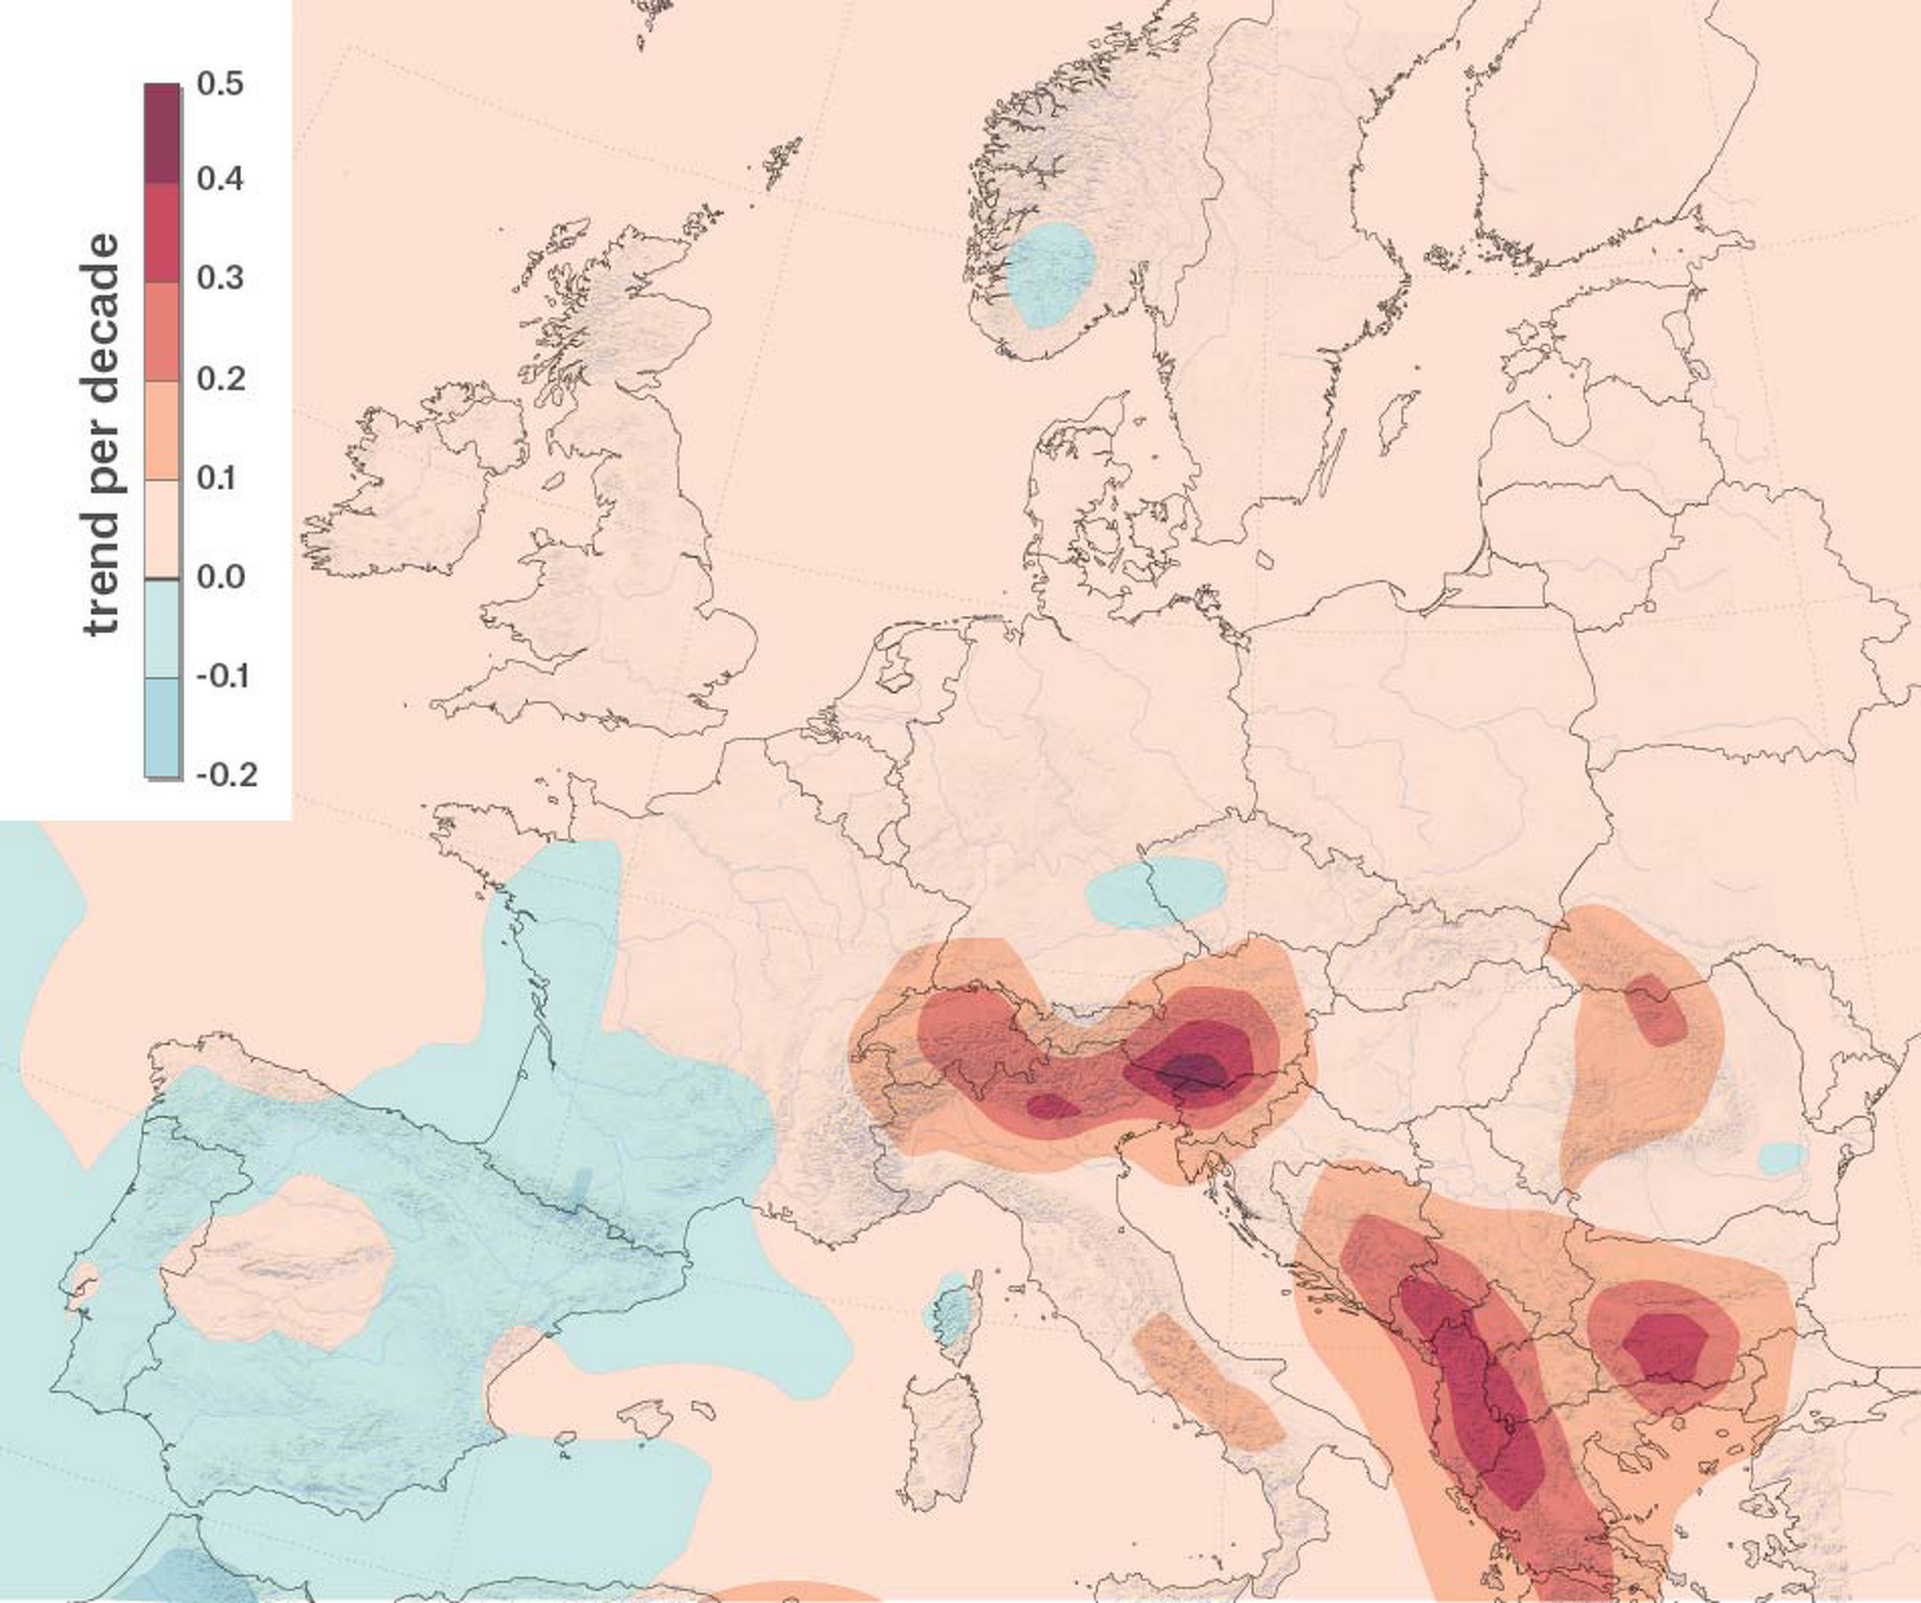 Number of hail events in Europe overall increased significantly over the years 1979-2015